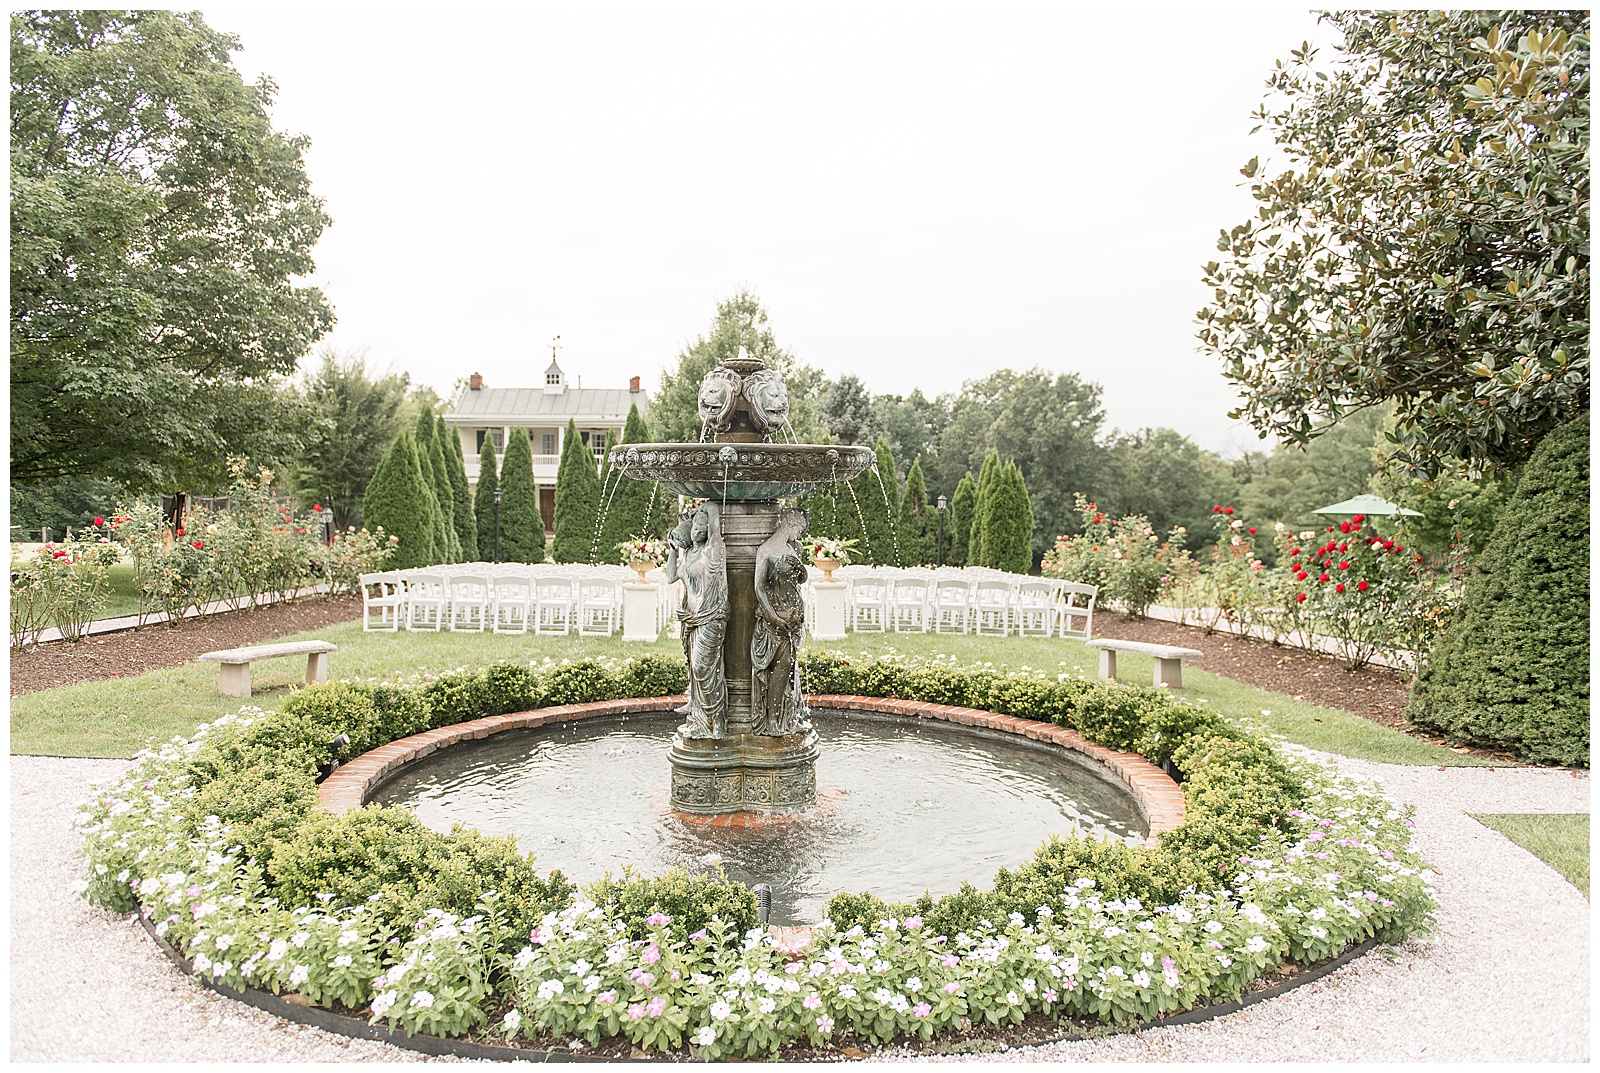 beautiful Antrim 1844 property with stunning flower gardens and a fountain on display in Maryland